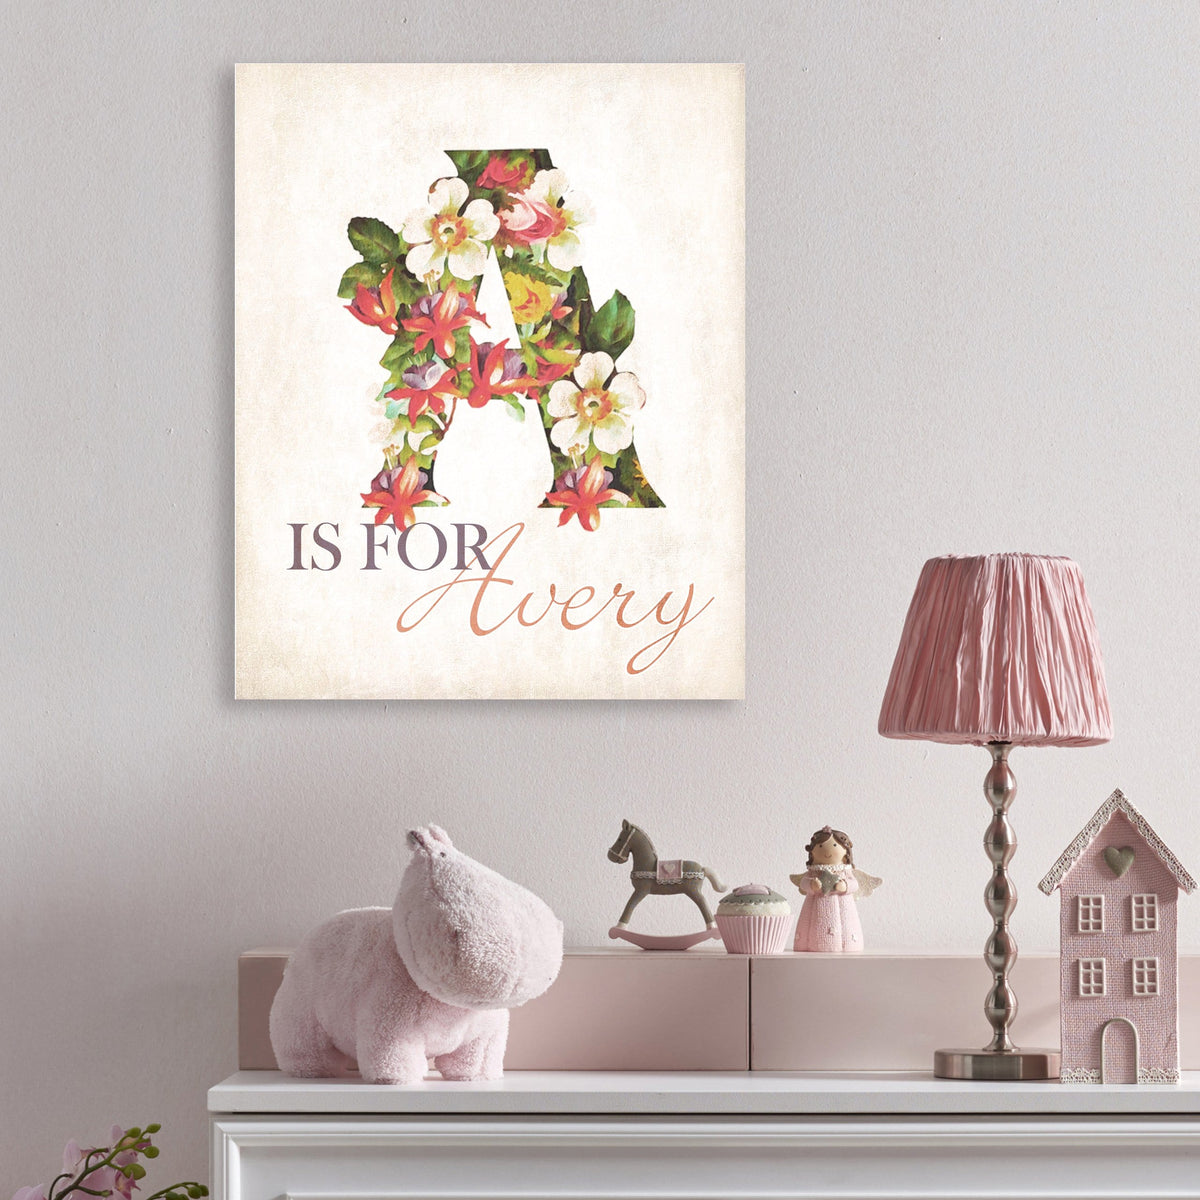 Personalize your walls with this beautiful flower wall decor 